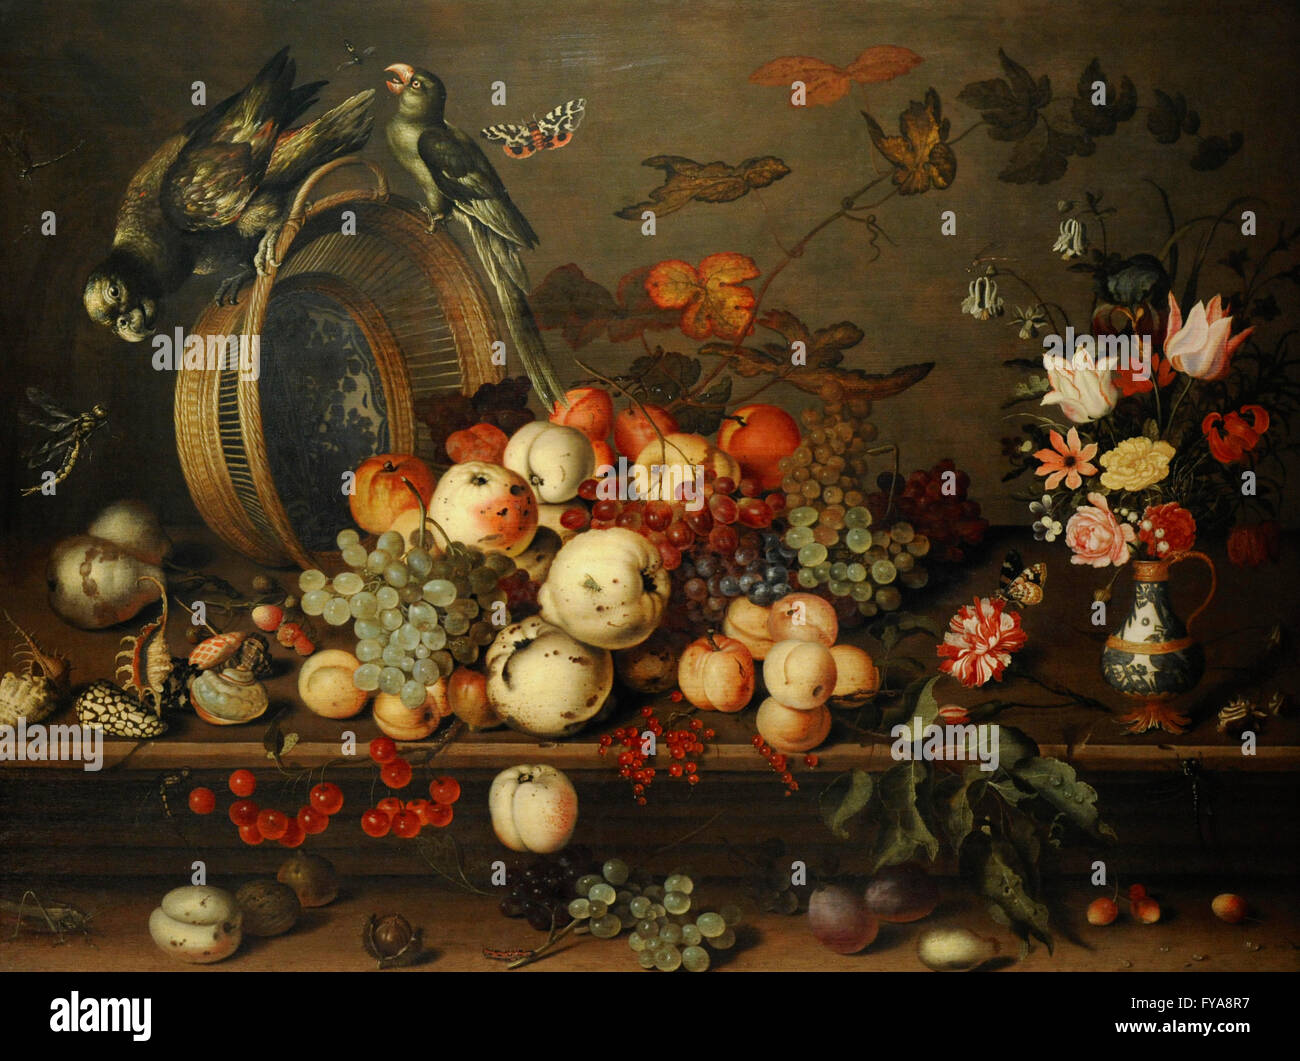 Balthasar van der Ast (1593-1657). Dutch painter. Still Life with Fruits, Shells and Insects, 1620s. The State Hermitage Museum. Saint Petersburg. Russia. Stock Photo